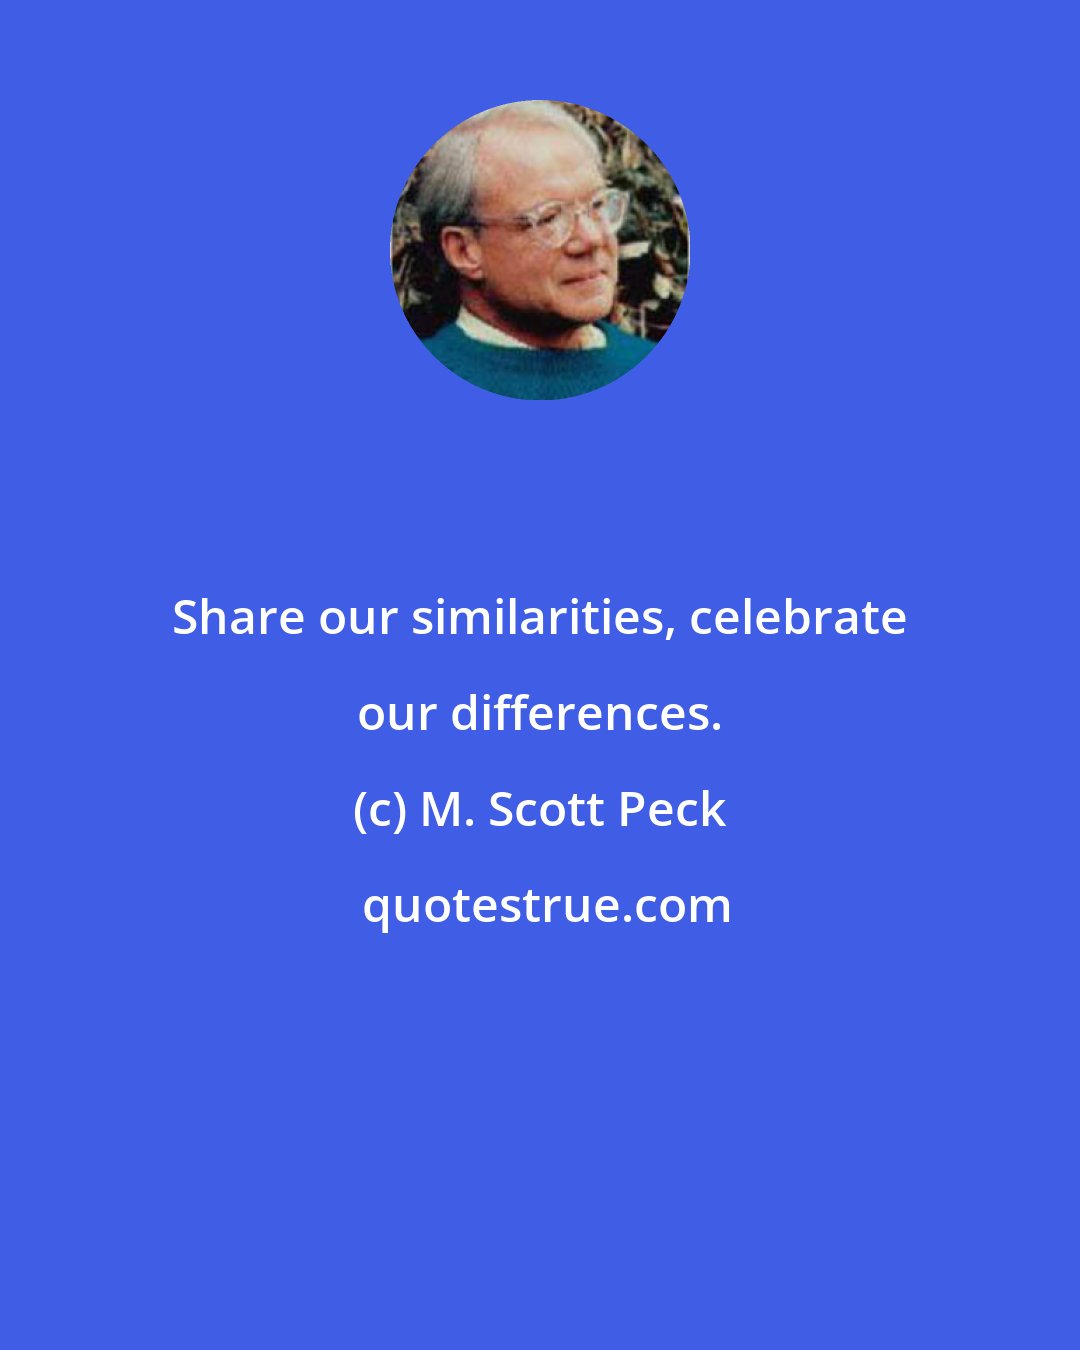 M. Scott Peck: Share our similarities, celebrate our differences.